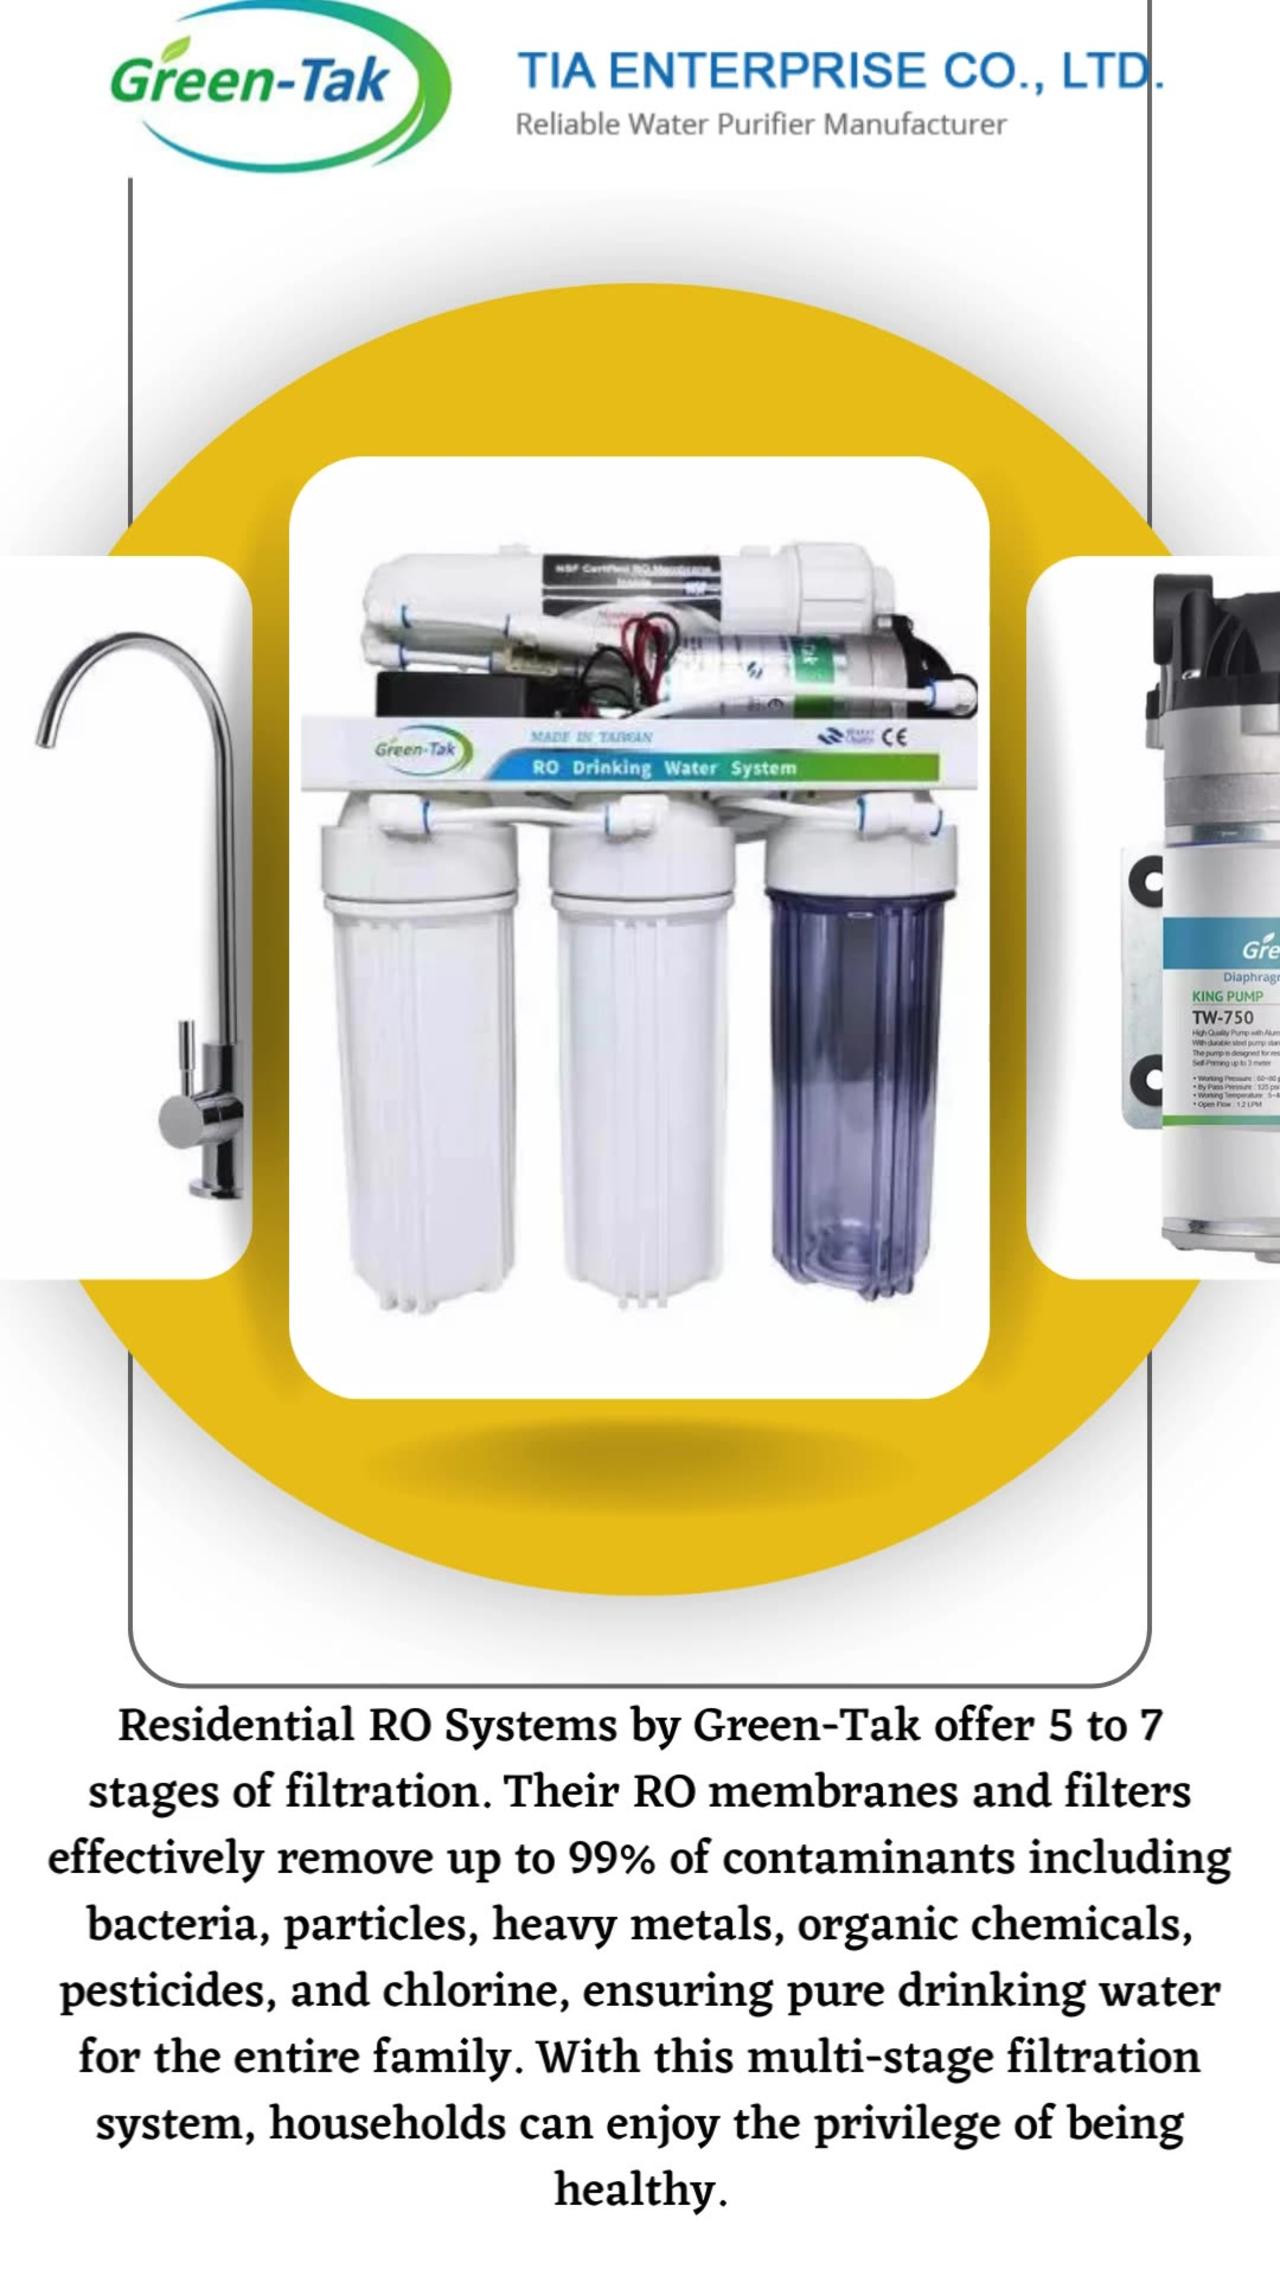 RO Water Filters: Powerful Purification for Your Home (Green-Tak)